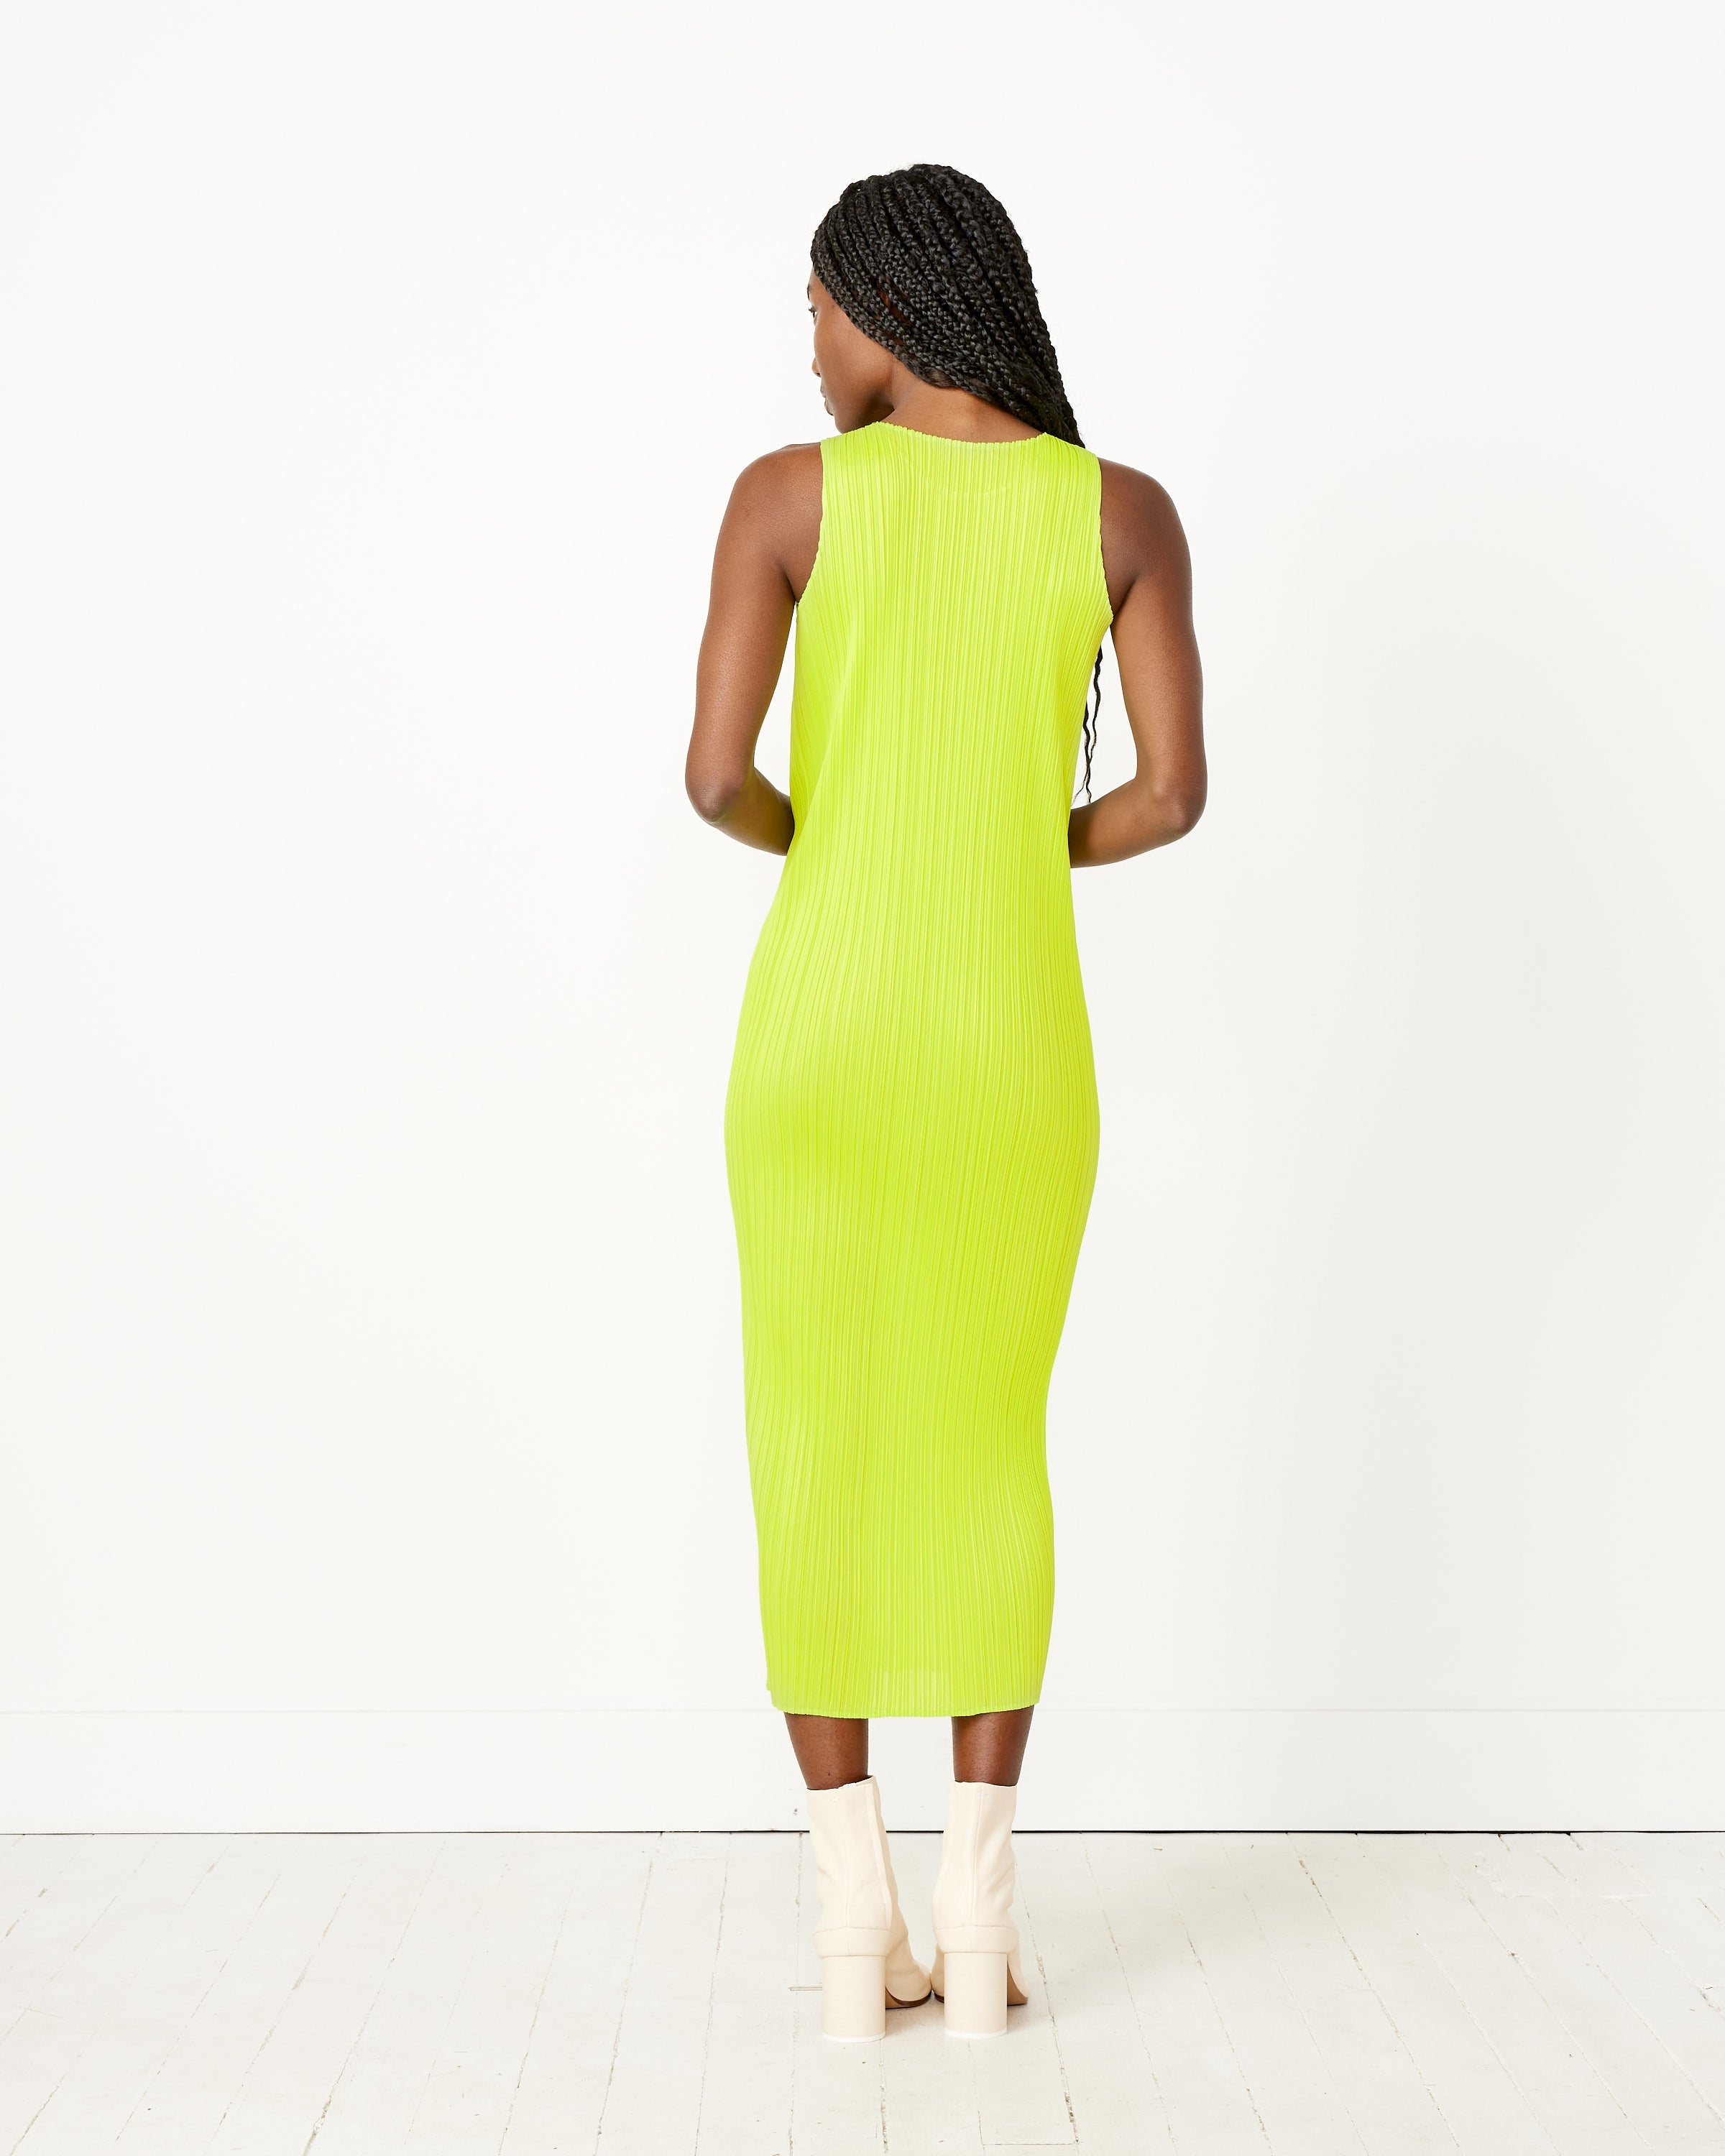 Colorful Basics 3 Dress in Yellow Green